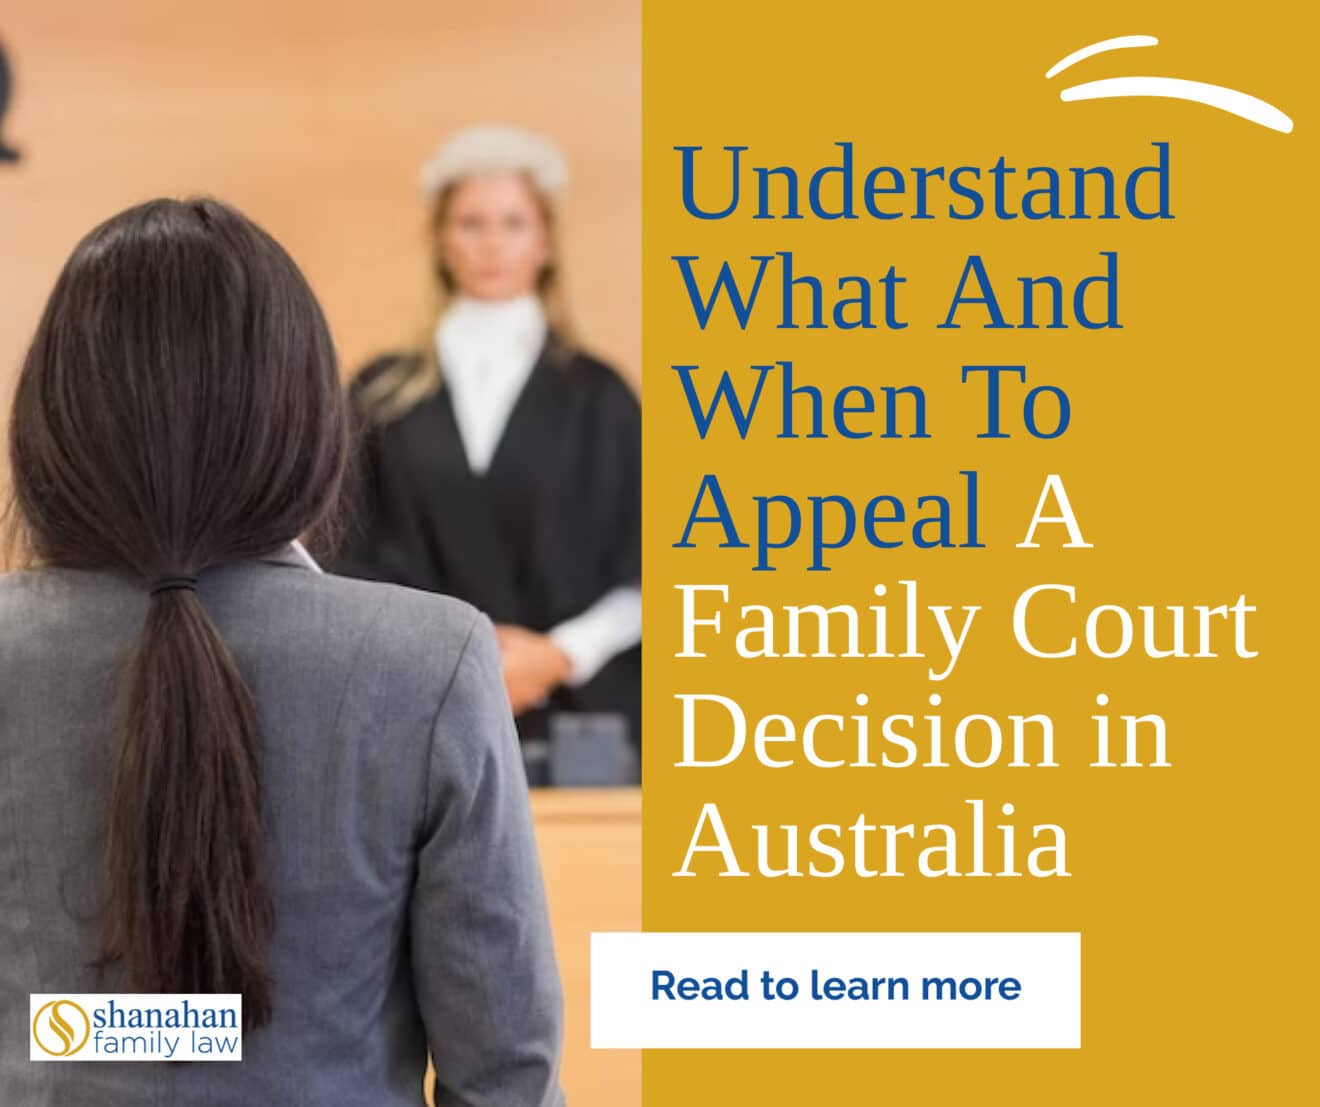 What Are Appeals And When To Appeal A Family Court Decision?